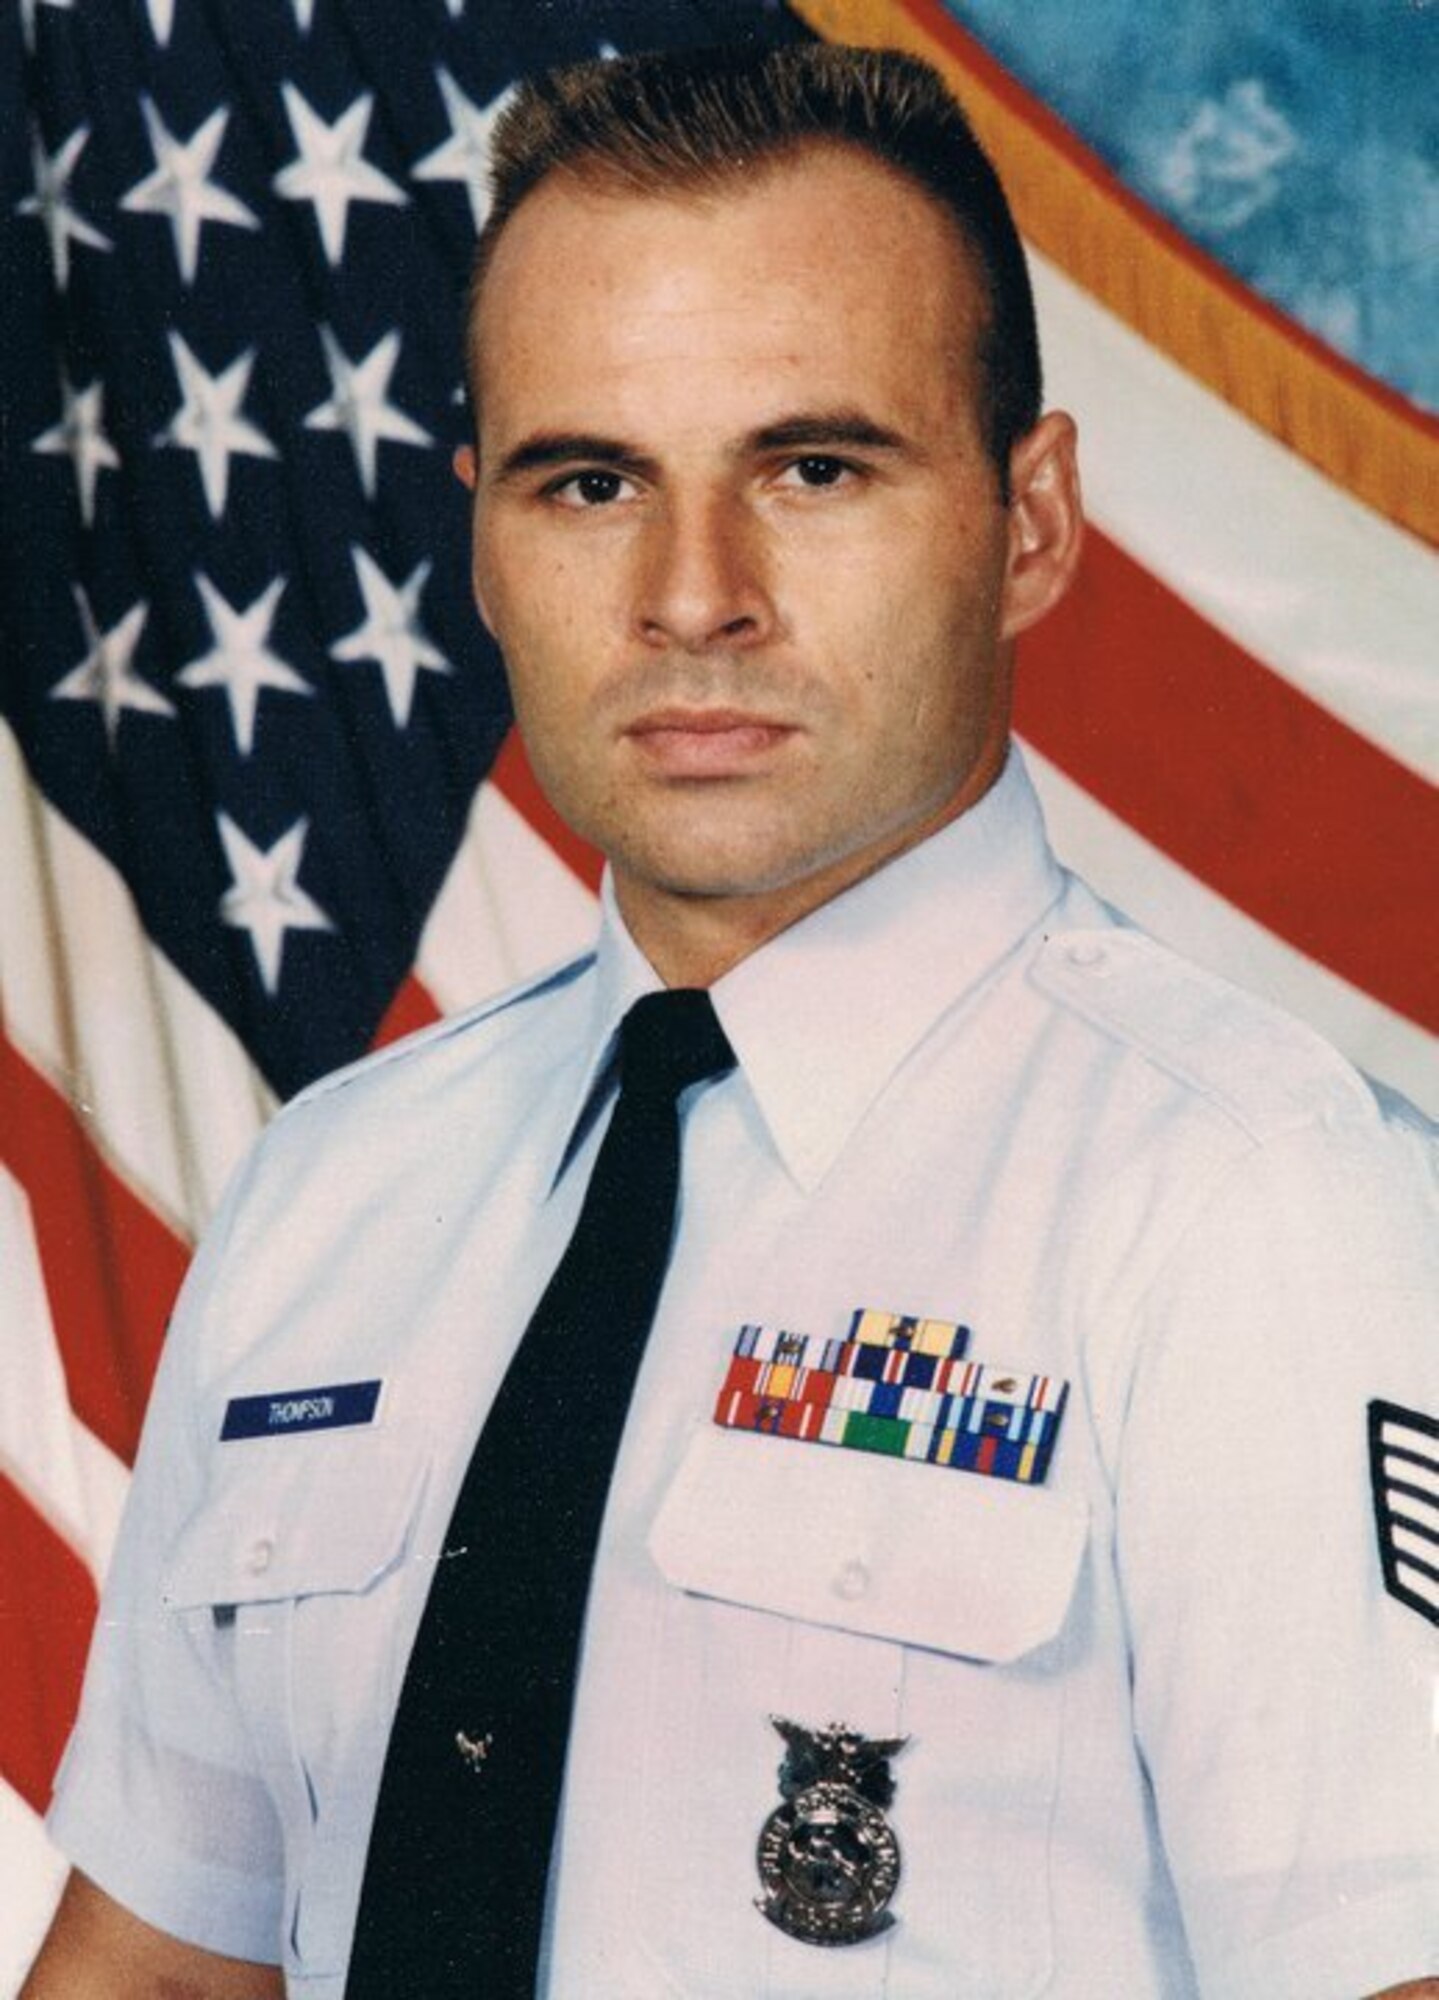 Then U.S. Air Force Tech. Sgt. John Thompson has his official photo taken at Anderson Air Force Base, Guam, 1994.